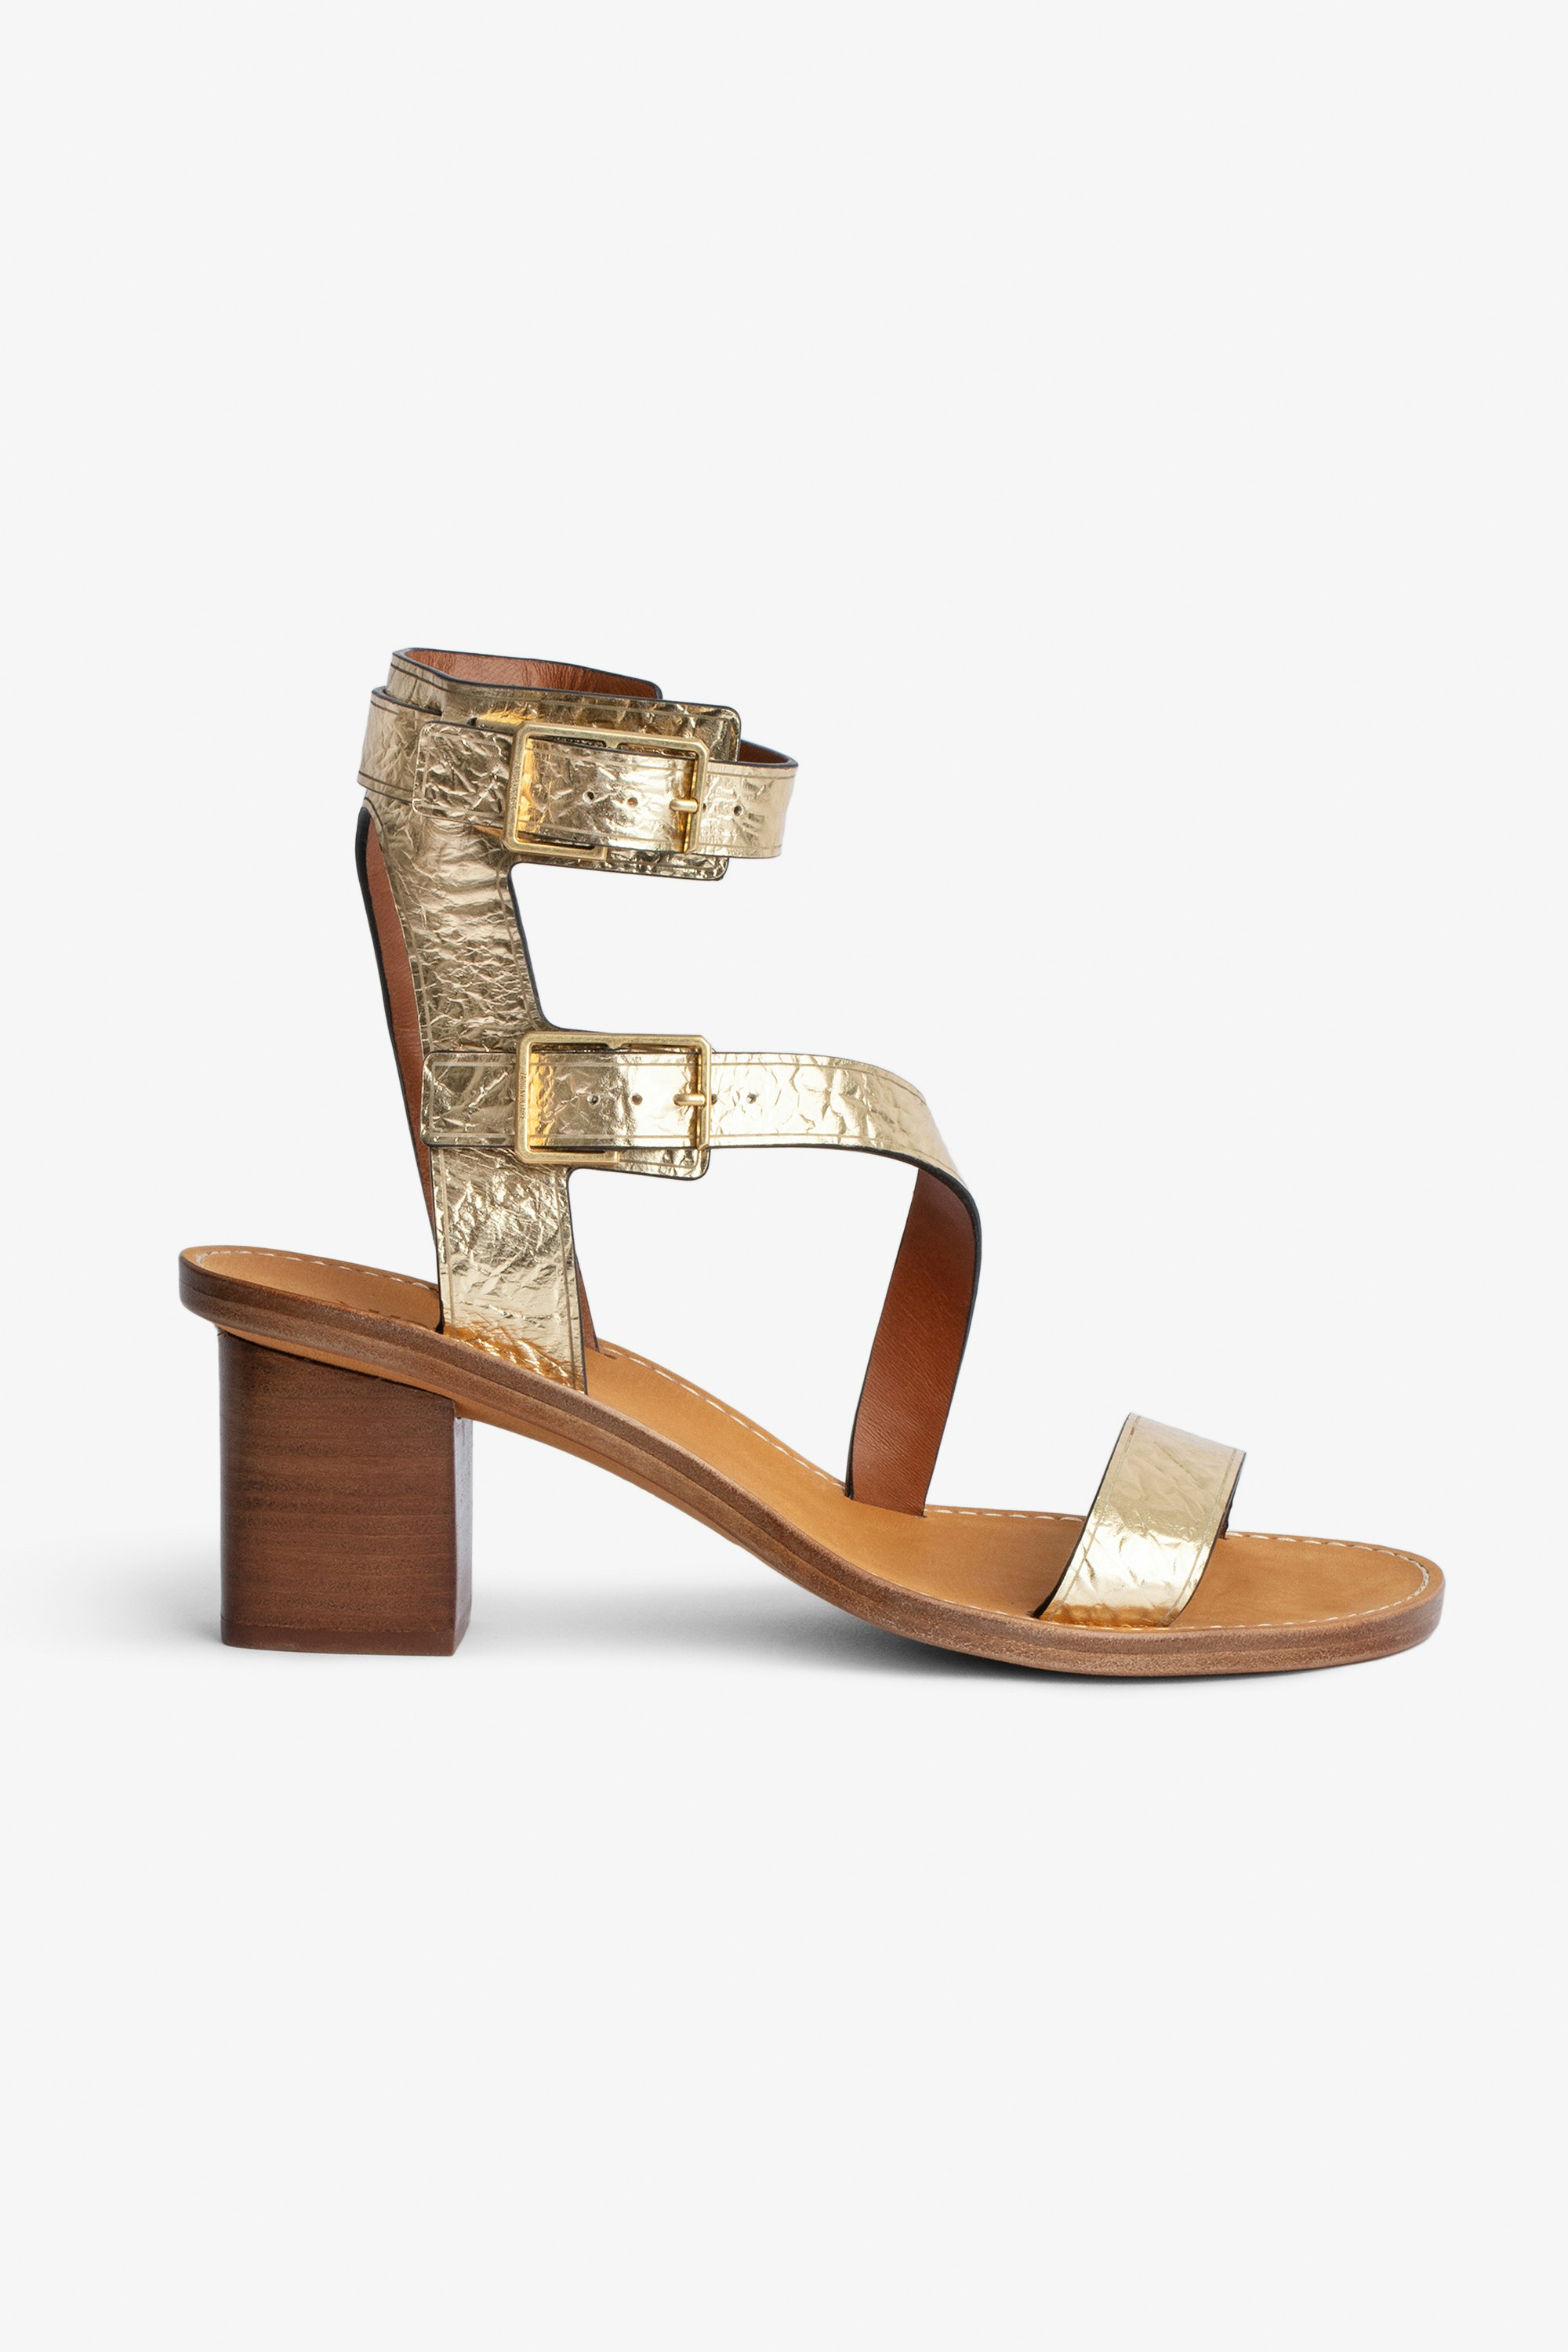 Cecilia Crinkled Caprese Sandals - Women's high-top sandals in metallic, crinkled leather with straps and C-shaped buckles